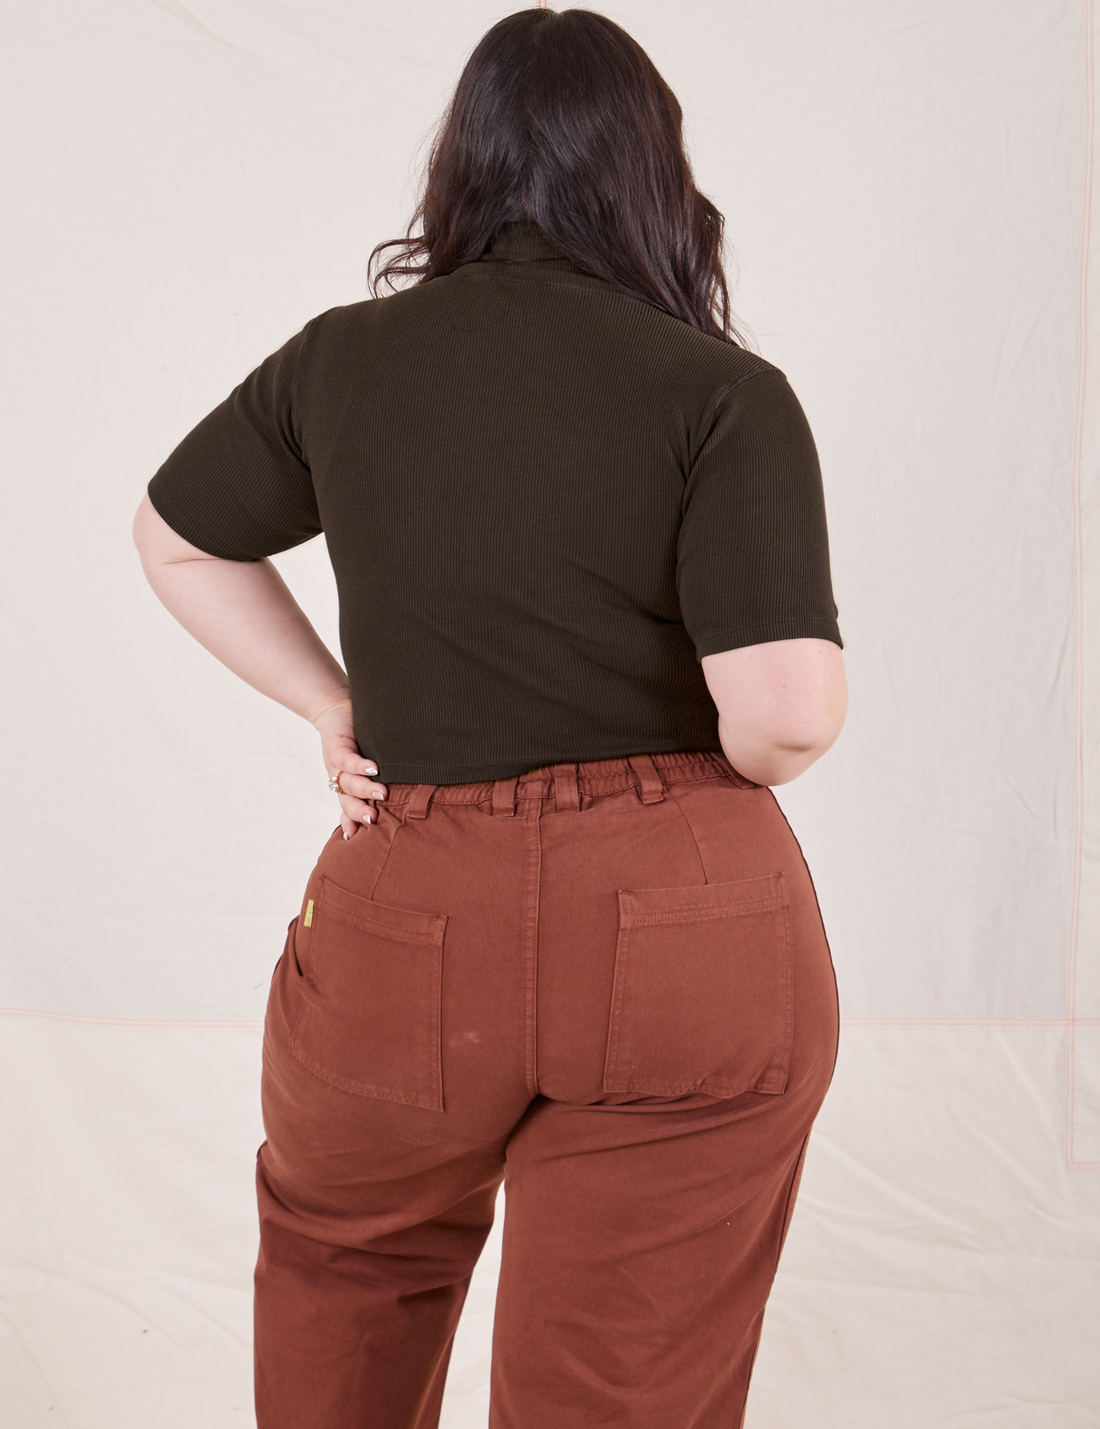 Back view of Ashley wearing 1/2 Sleeve Essential Turtleneck in Espresso Brown and fudgesicle brown Bell Bottoms